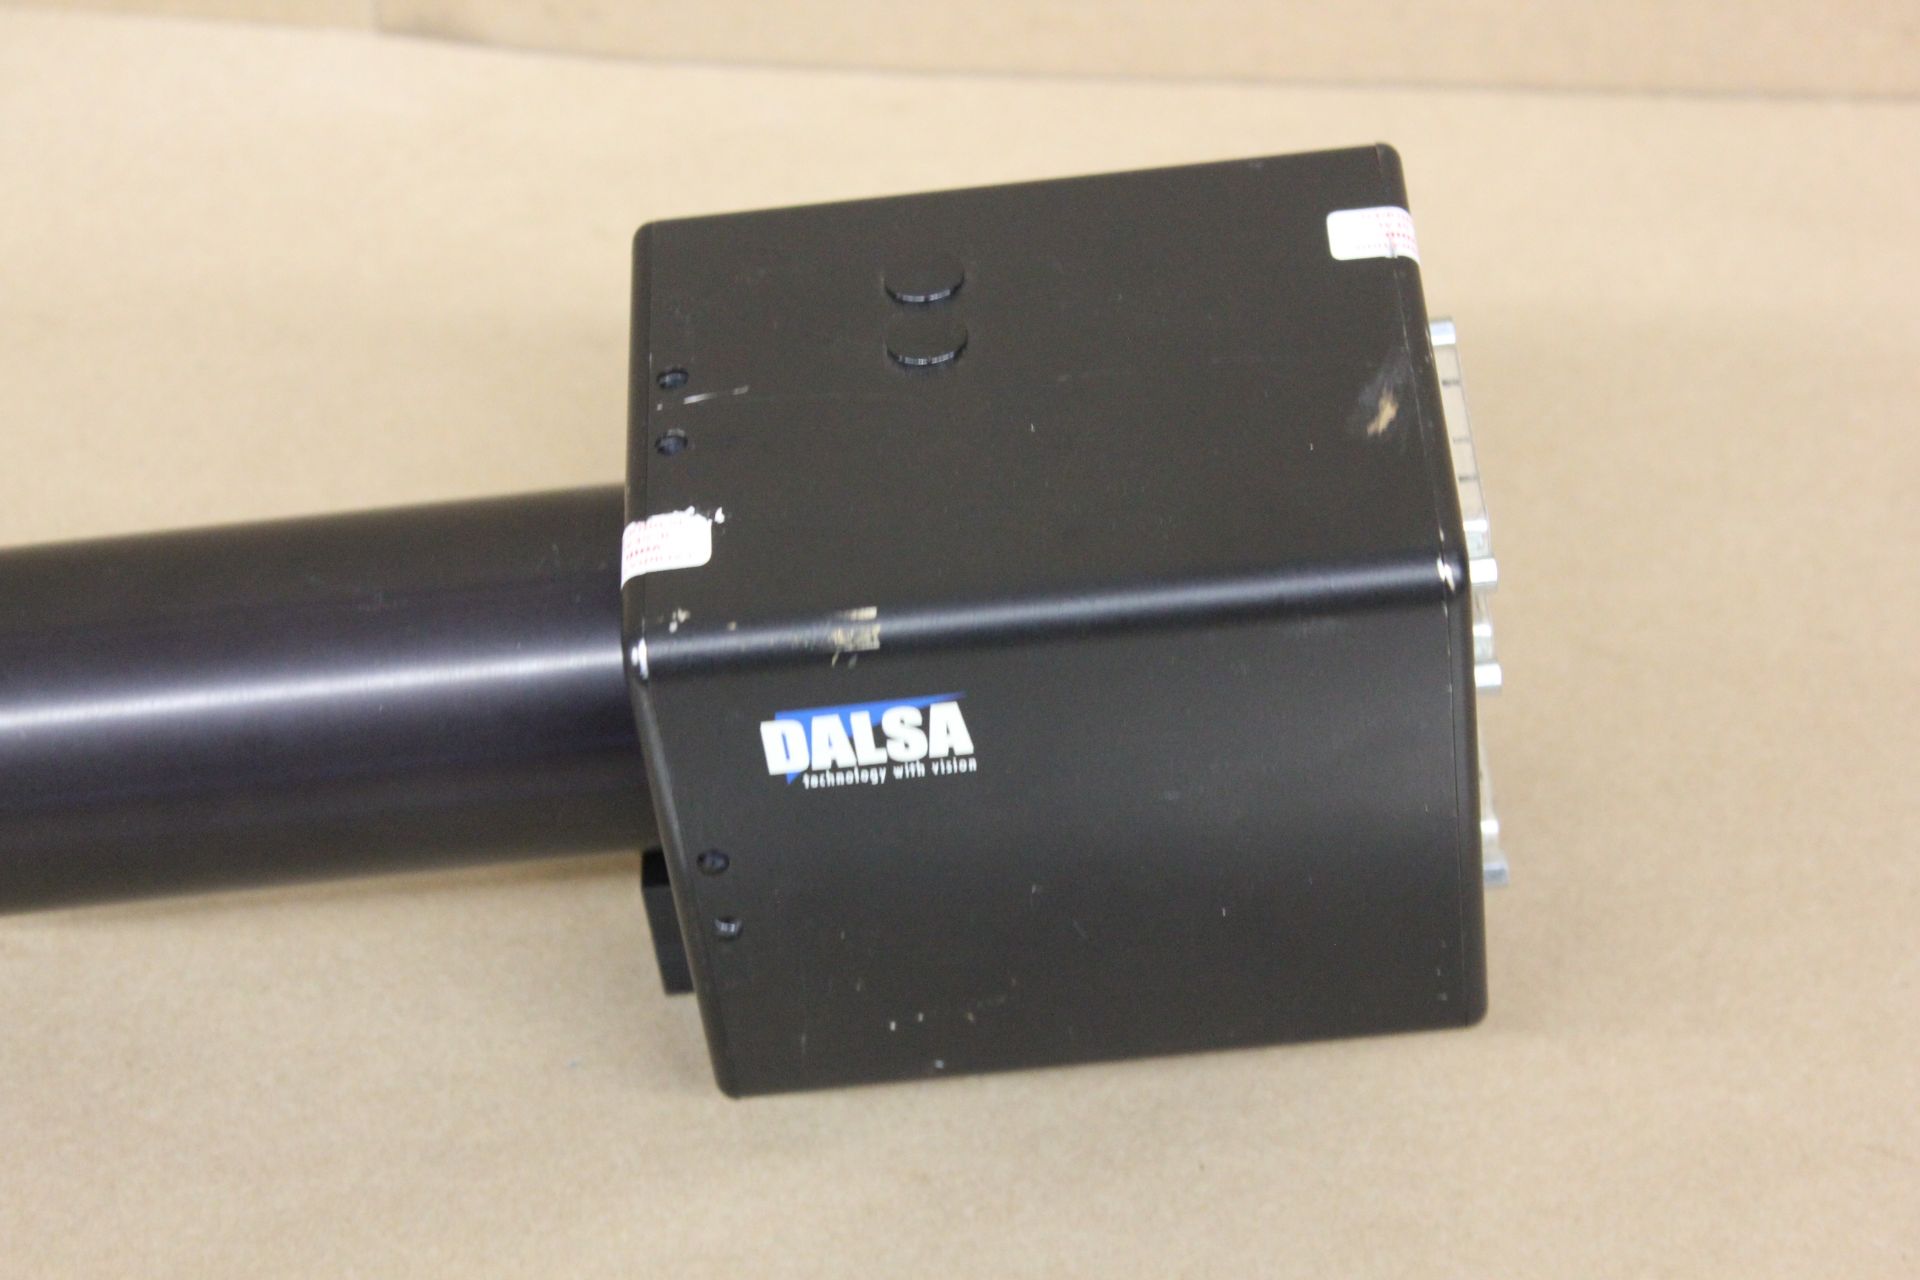 DALSA MACHINE VISION CAMERA WITH EXTENDED LENS - Image 3 of 5